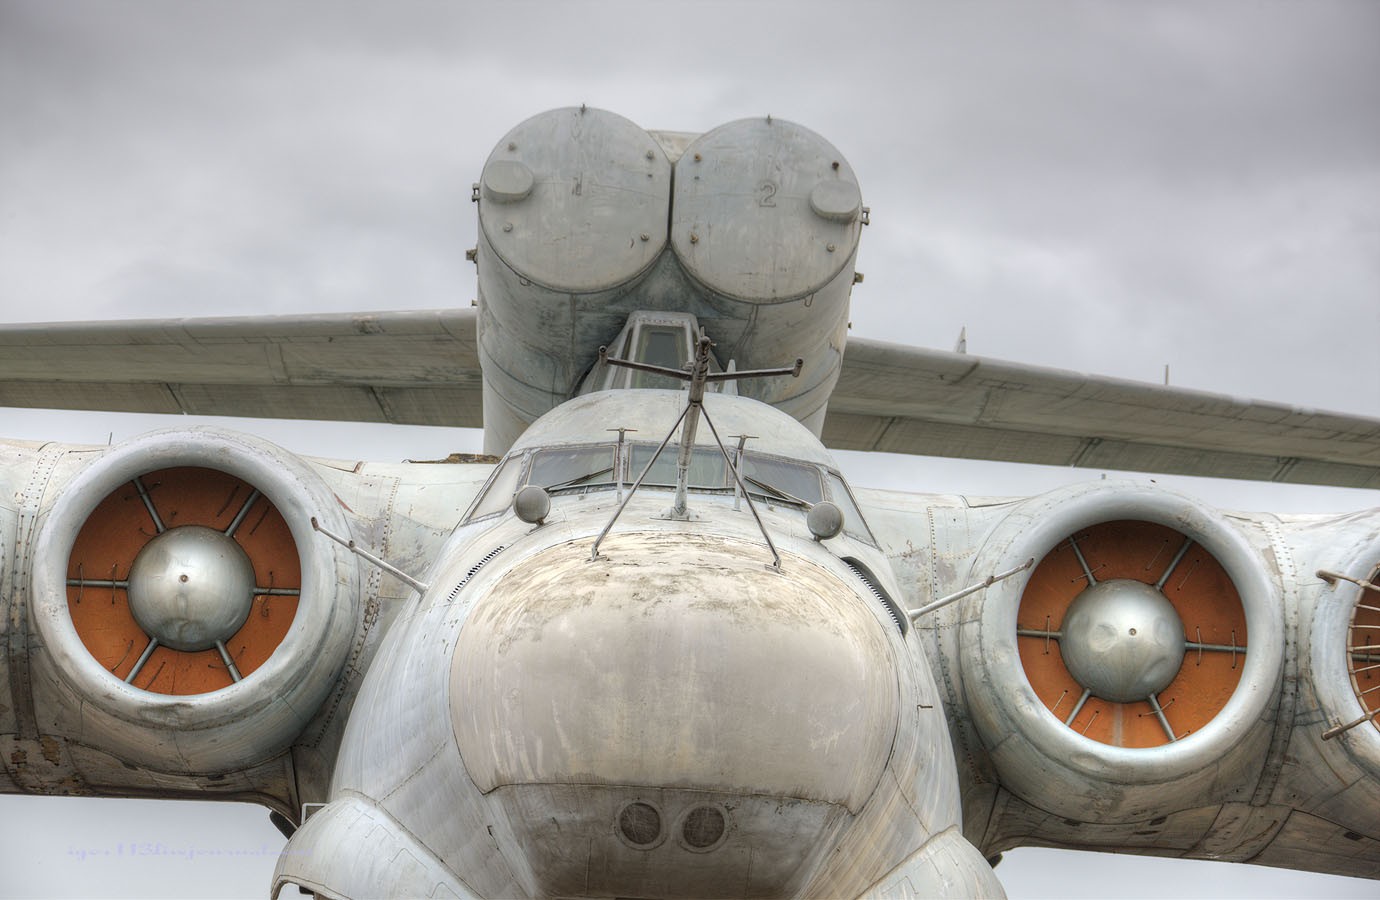 General 1380x900 Lun class ekranoplan aircraft military aircraft Russian/Soviet aircraft military military vehicle vehicle frontal view overcast clouds